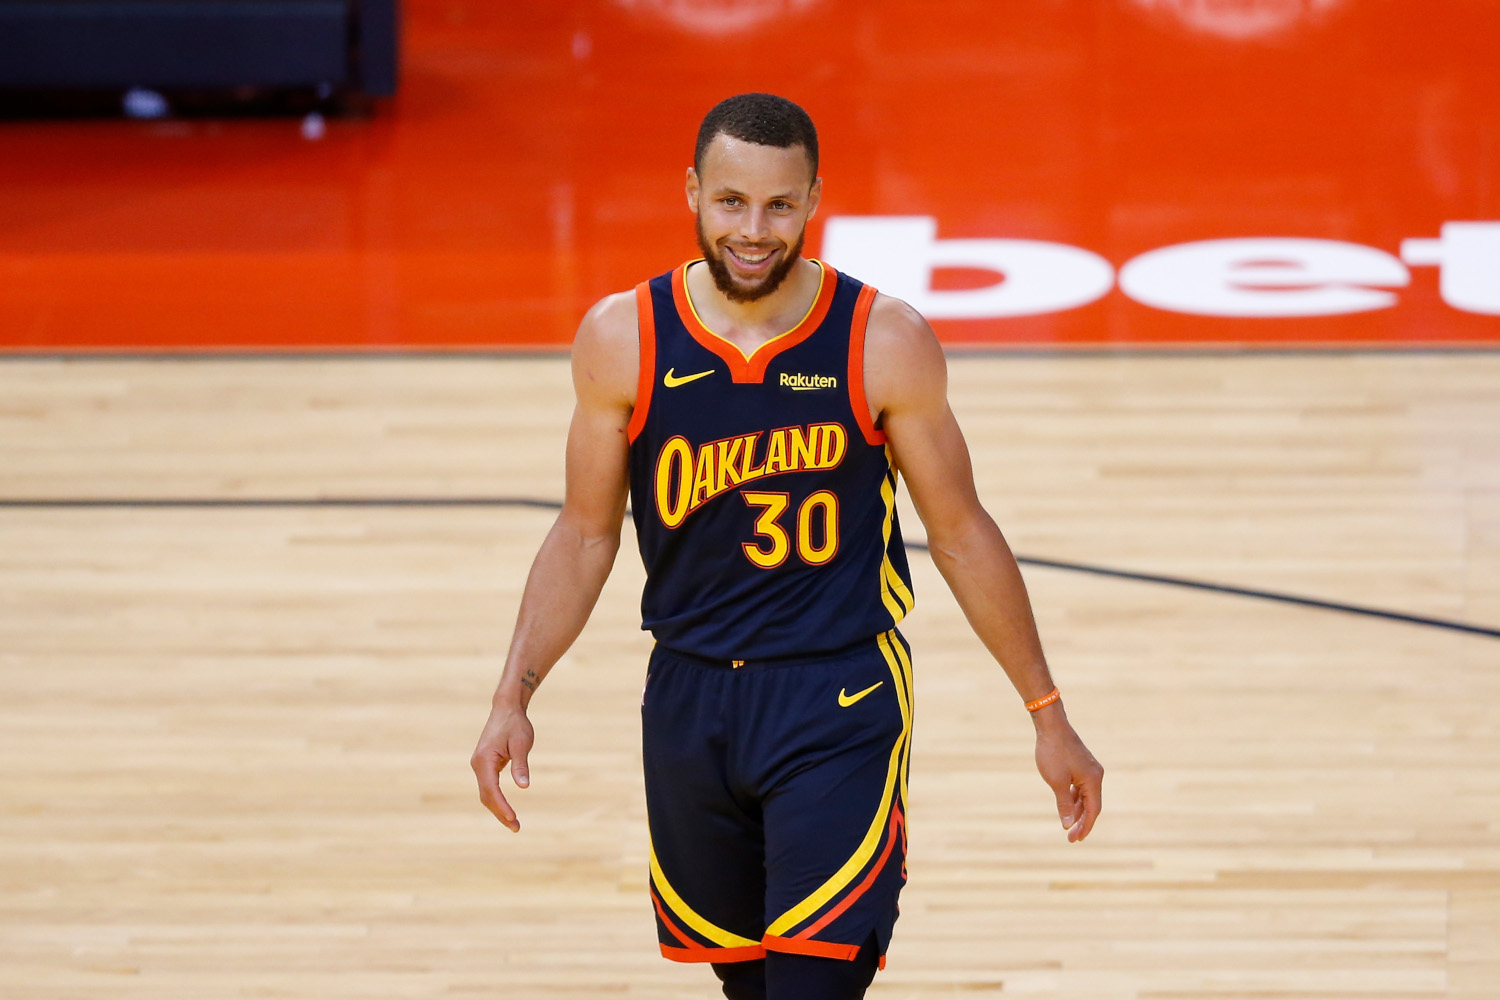 Warriors Star Stephen Curry Can Trace His MVP Shot to an Outdoor Hoop in Rural Virginia